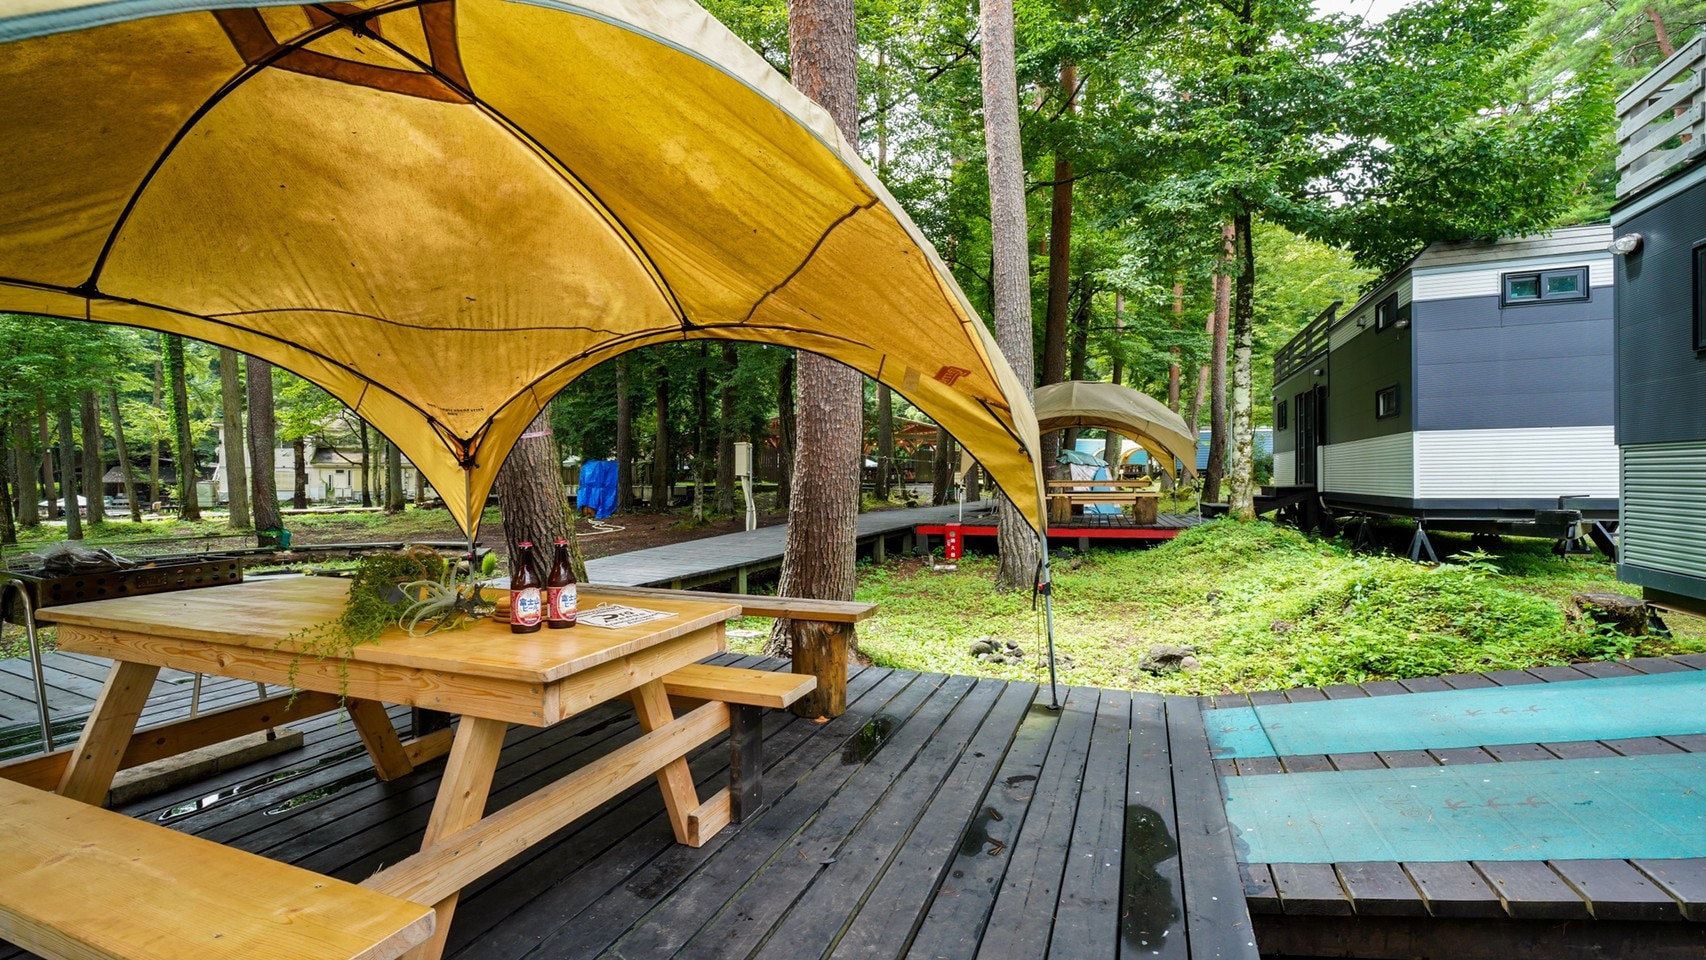 ・The trailer house “Journey” is equipped with a terrace with an individual tarp.